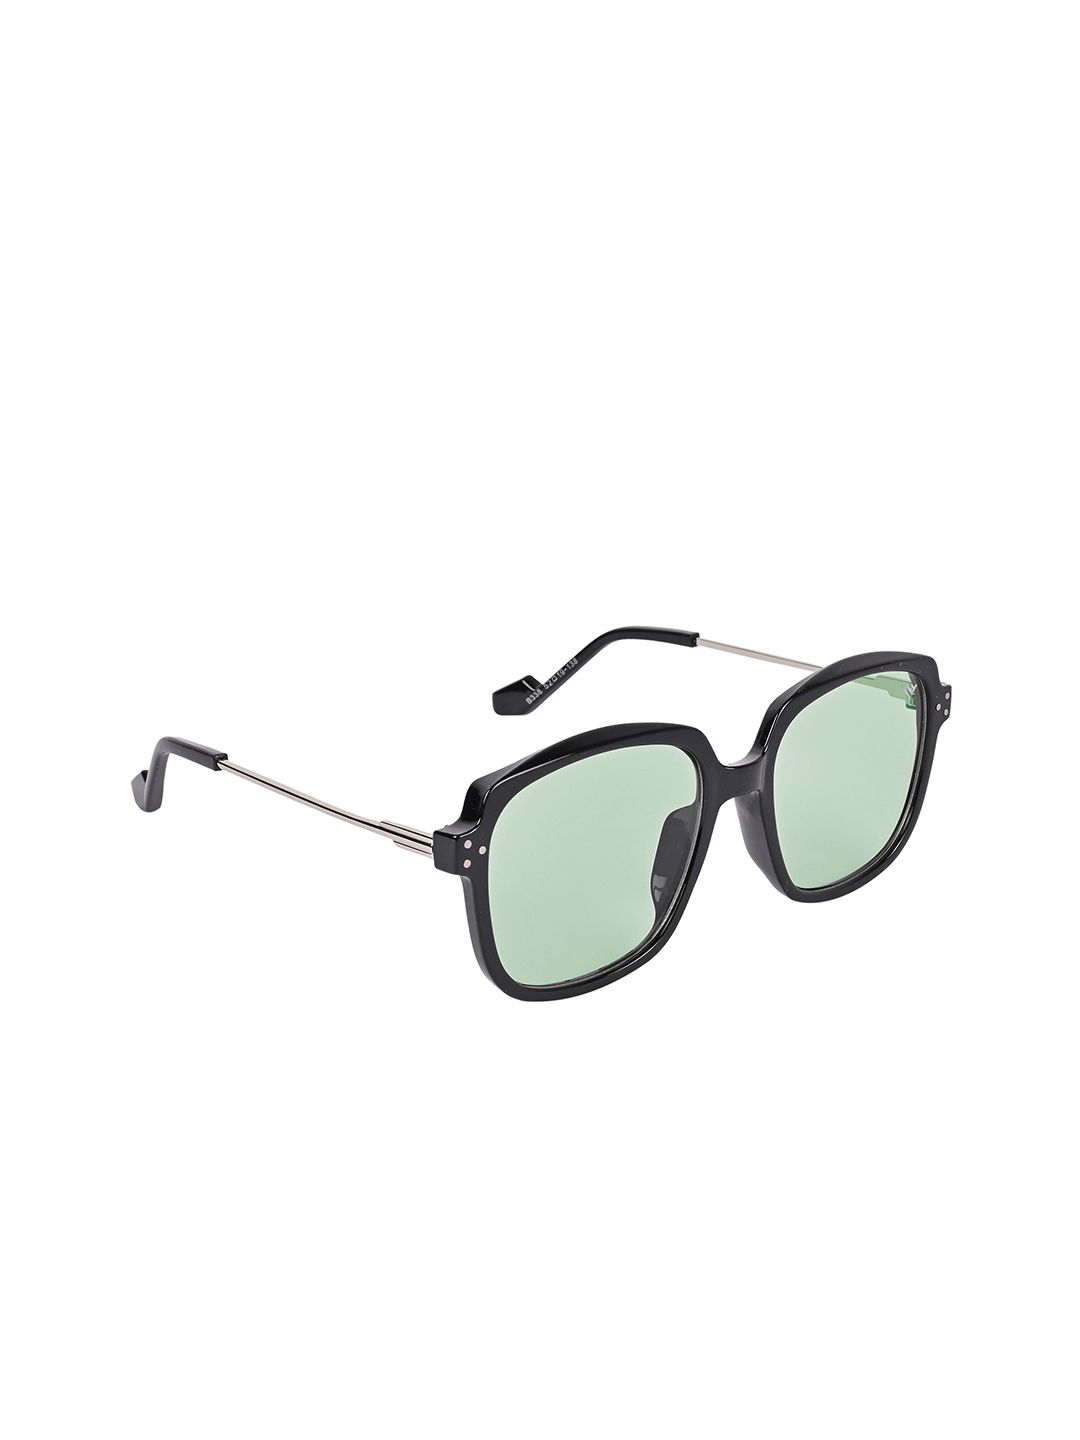 Voyage Unisex Green Lens & Black Square Sunglasses with UV Protected Lens Price in India